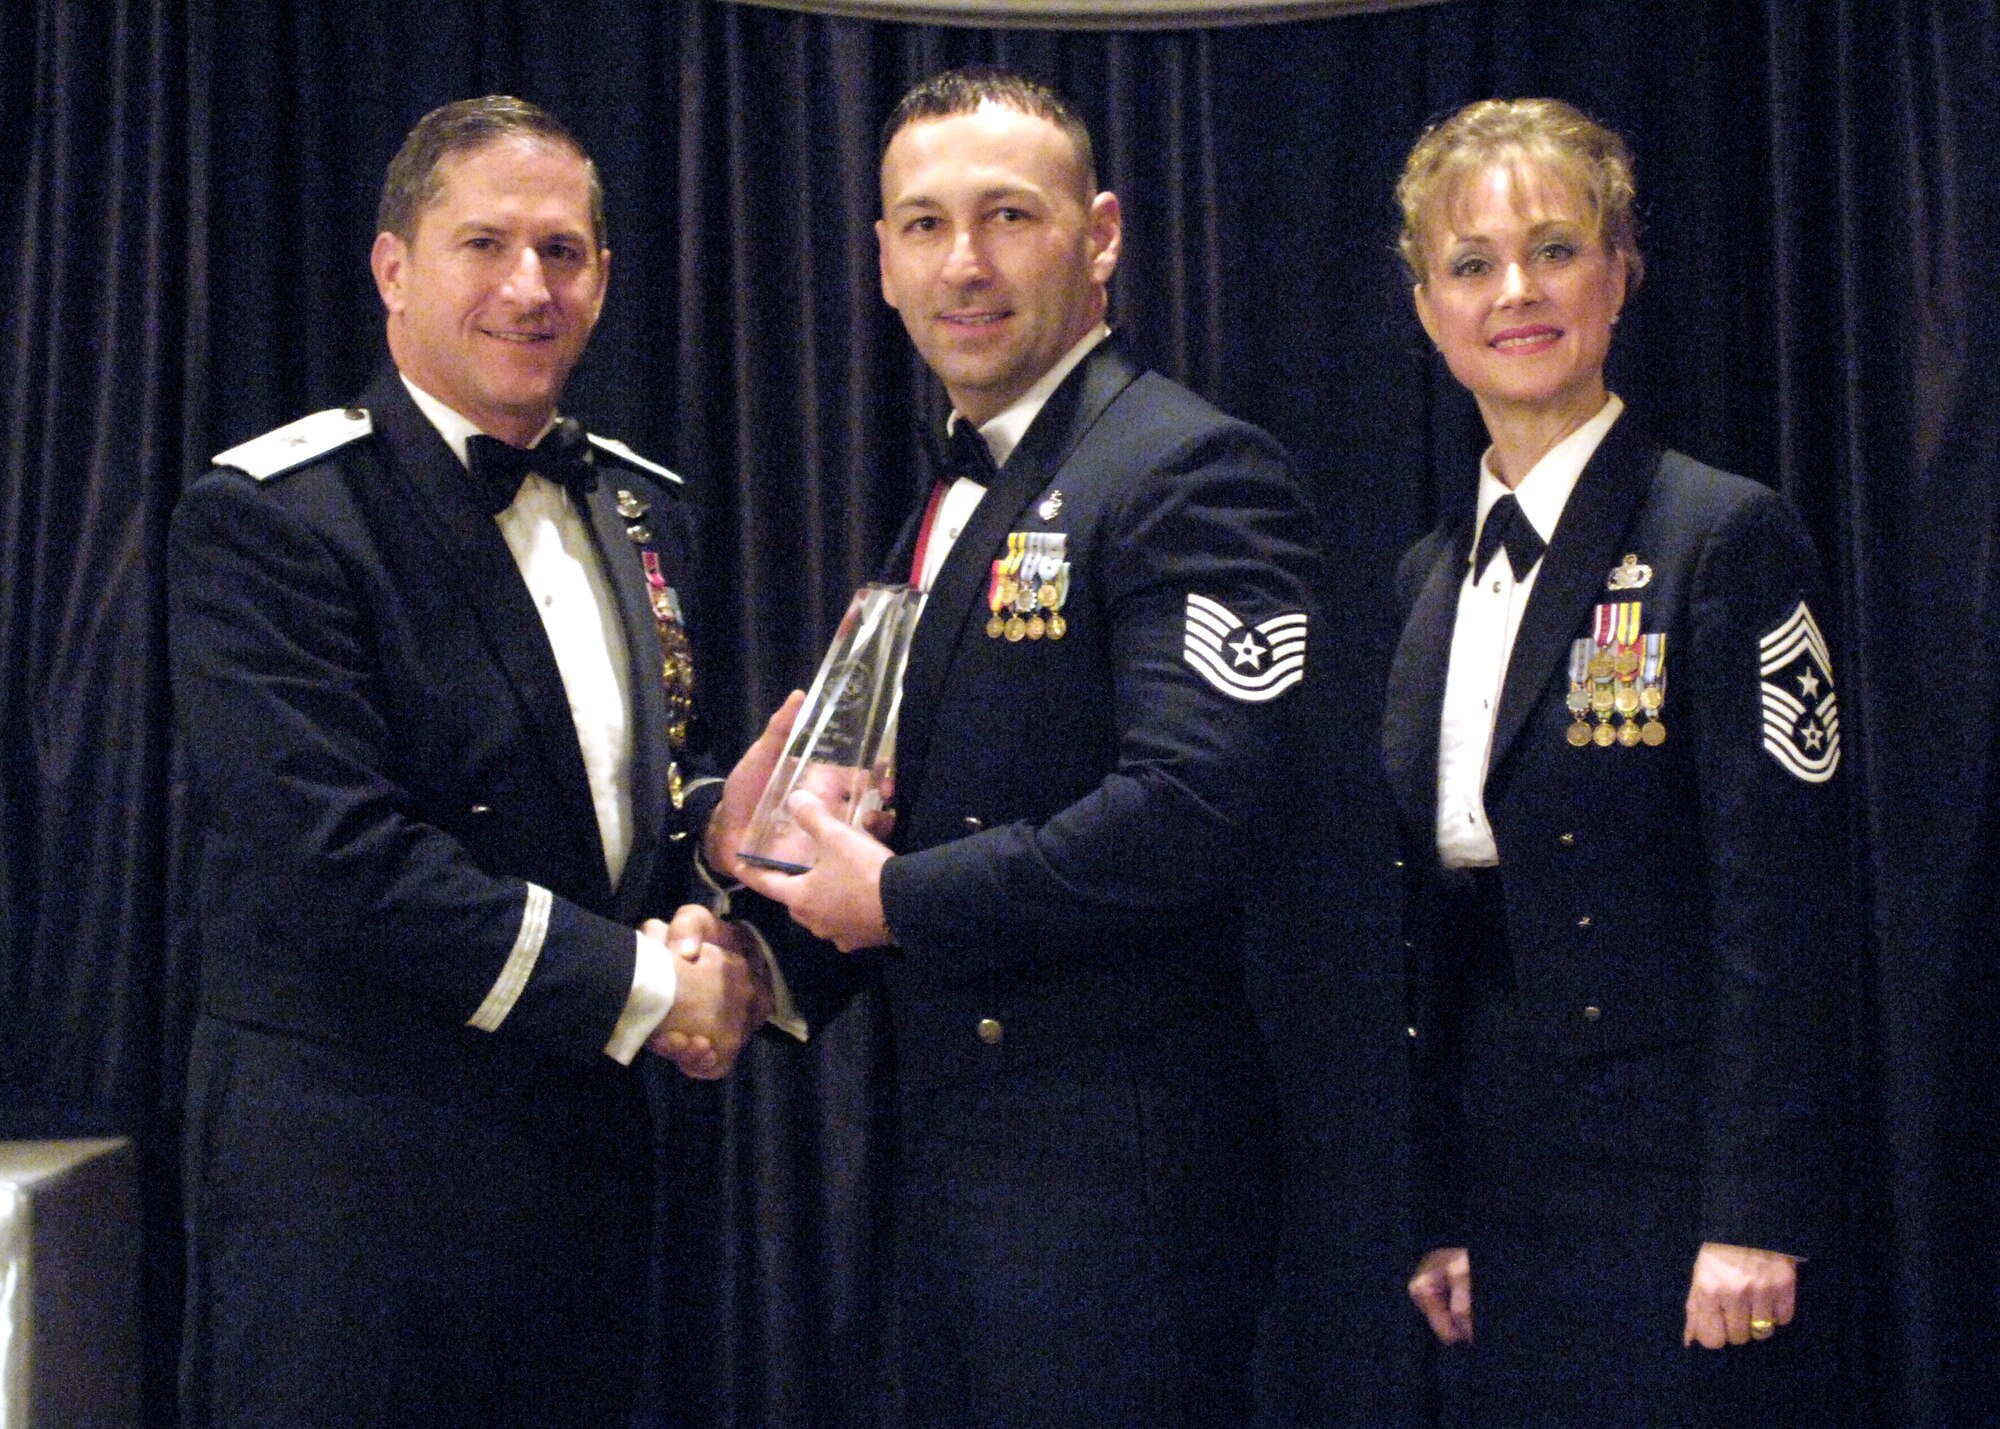 Noncommissioned officer of the Year, Tech. Sgt. Charles Veillon, 49th Aeromedical Dental Squadron.